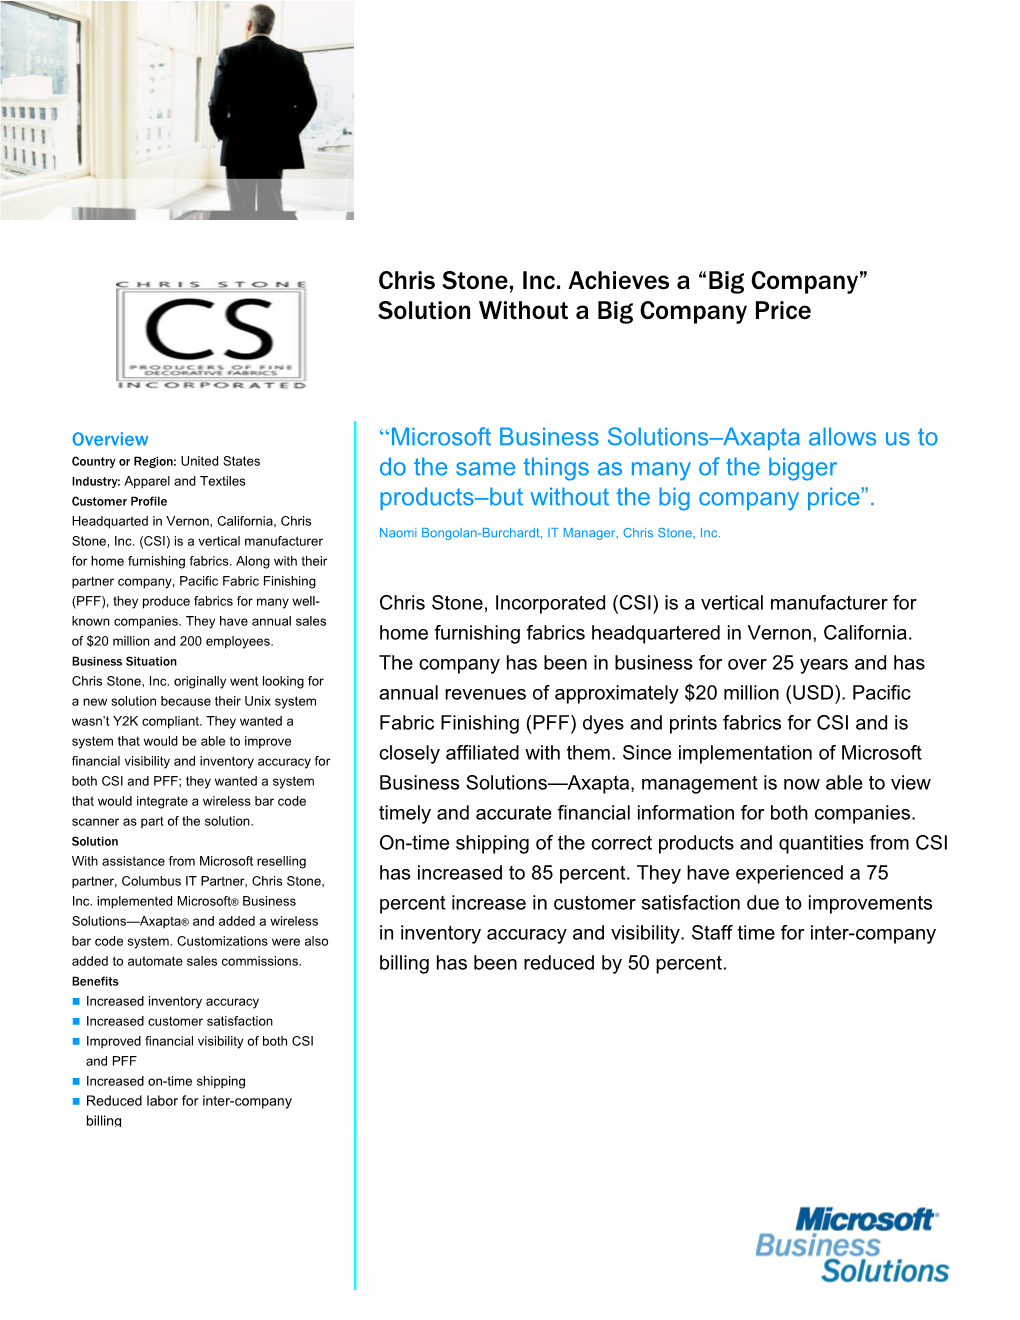 Chris Stone, Inc. Achieves a Big Company Solution Without a Big Company Price